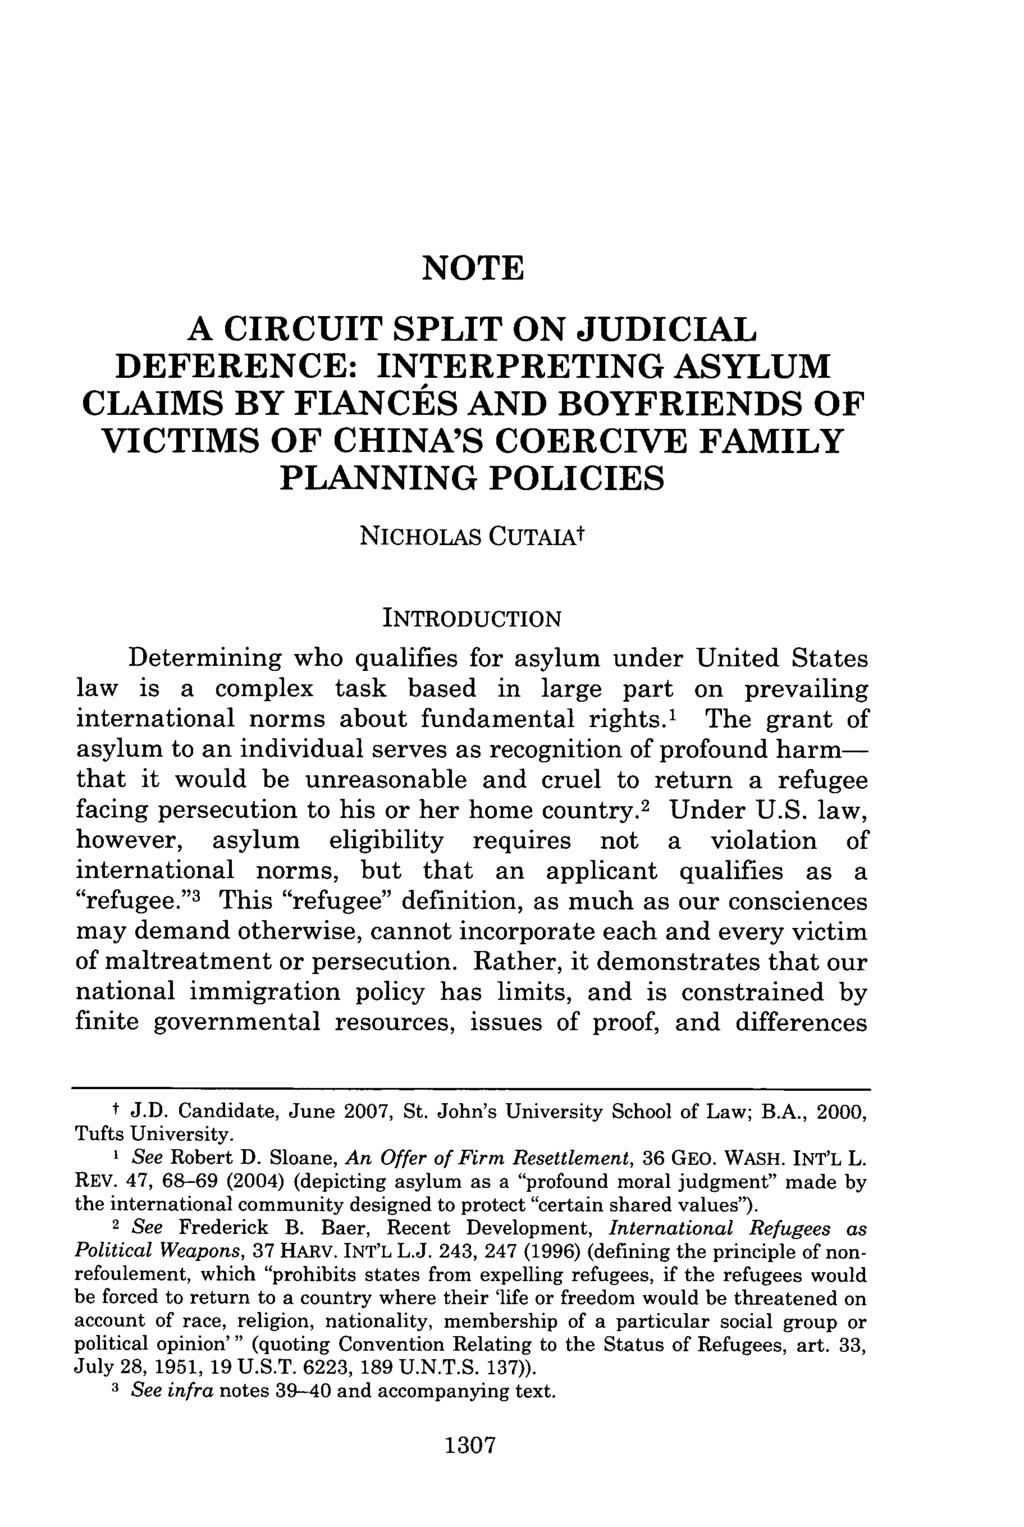 NOTE A CIRCUIT SPLIT ON JUDICIAL DEFERENCE: INTERPRETING ASYLUM CLAIMS BY FIANCES AND BOYFRIENDS OF VICTIMS OF CHINA'S COERCIVE FAMILY PLANNING POLICIES NICHOLAS CUTAIAt INTRODUCTION Determining who